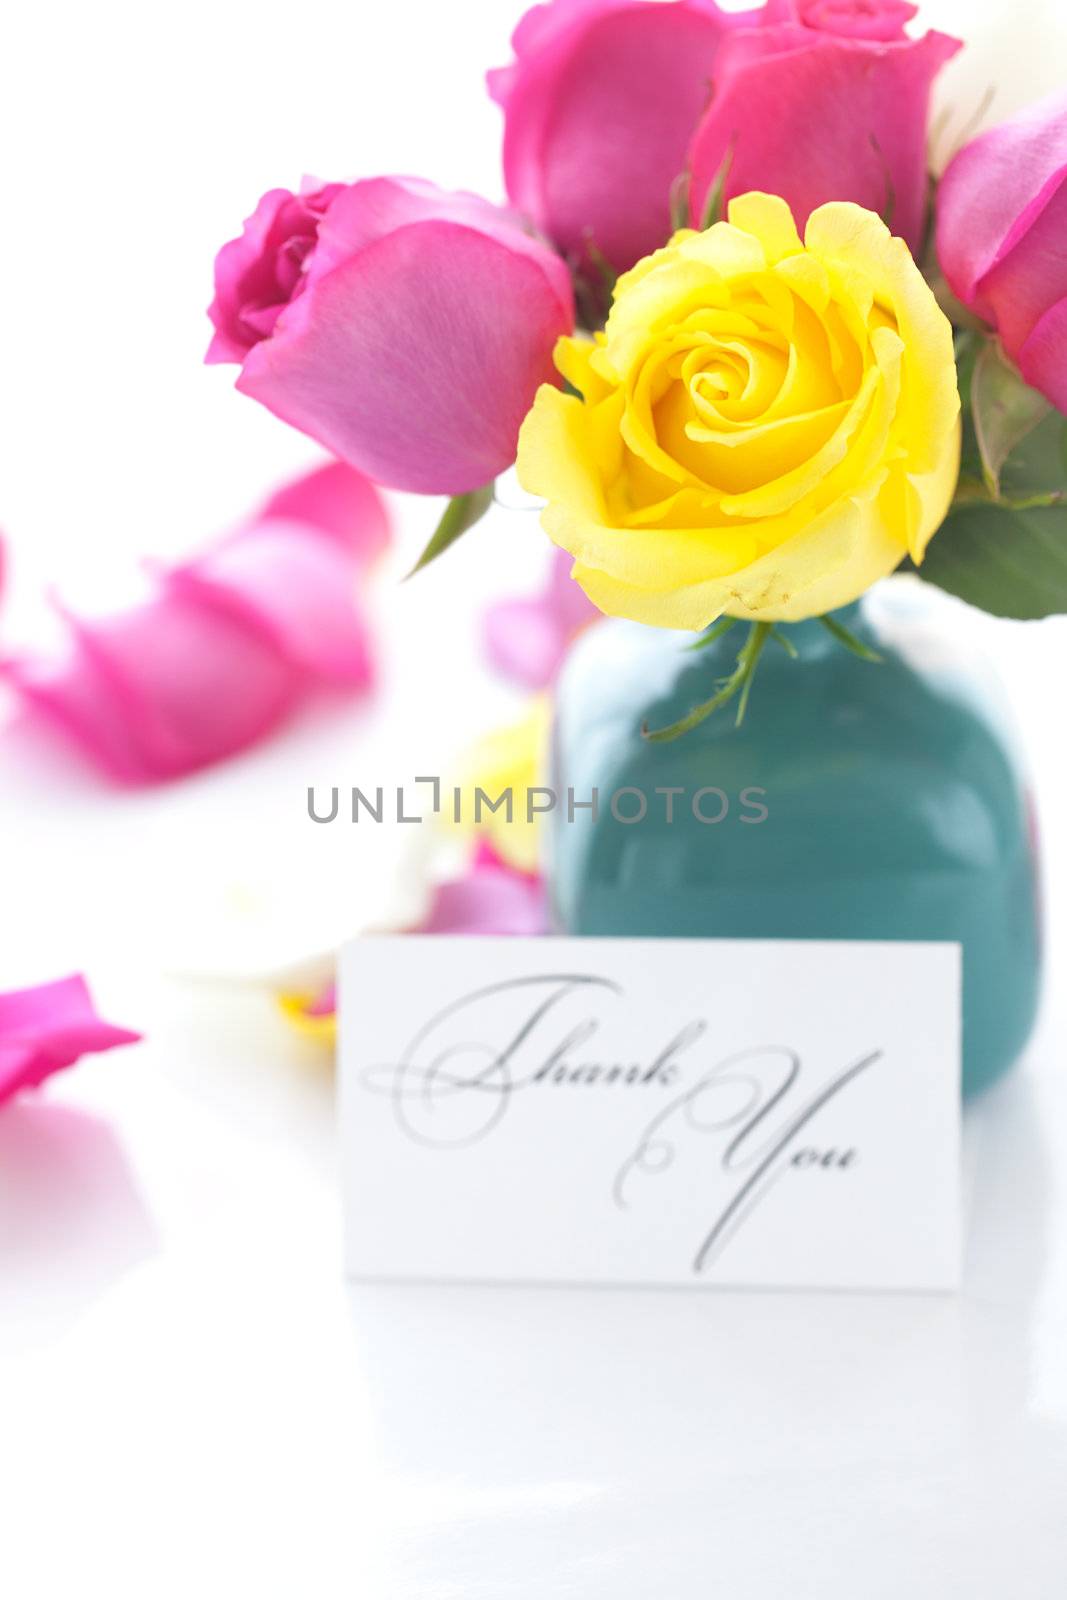 bouquet of colorful roses in vase,petals and card with the words by jannyjus